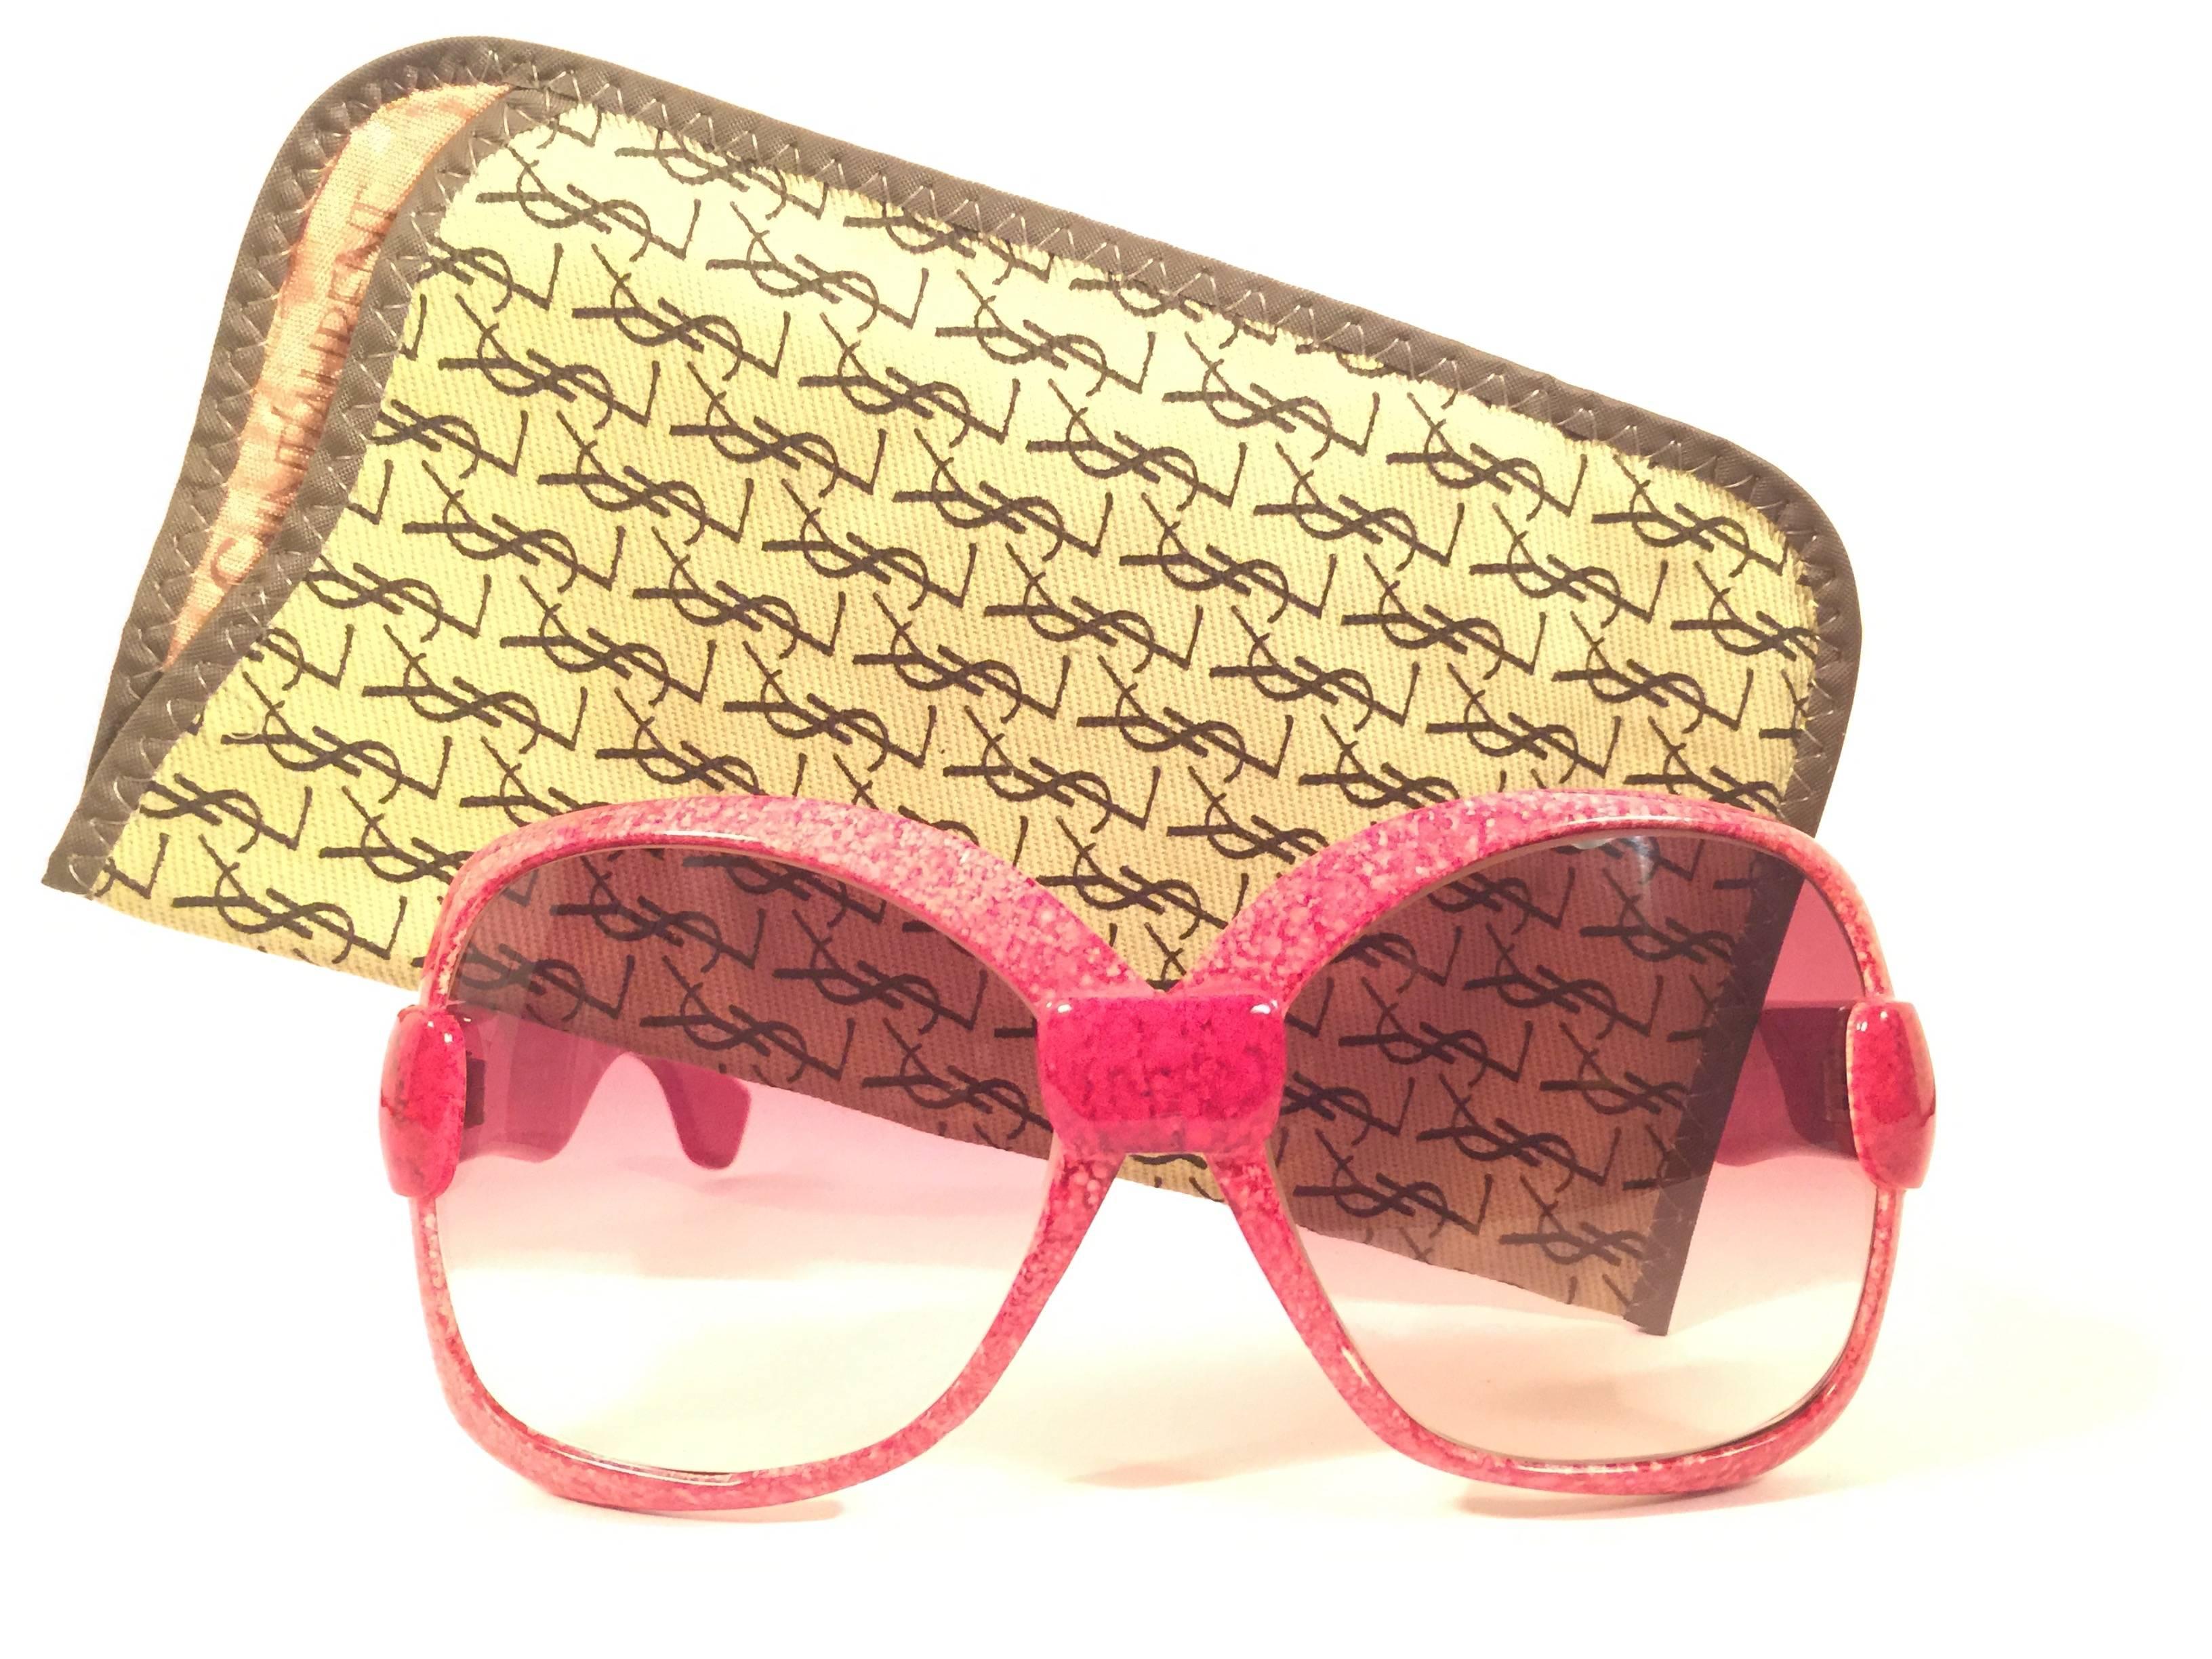 Beautiful and stylish vintage new Yves Saint Laurent 1970’s Oversized sunglasses in a jasped red frame. Spotless pair of light rose gradient lenses. New! never worn or displayed. Flawless pair!!!   Comes with its original YSL sleeve.  This pair is